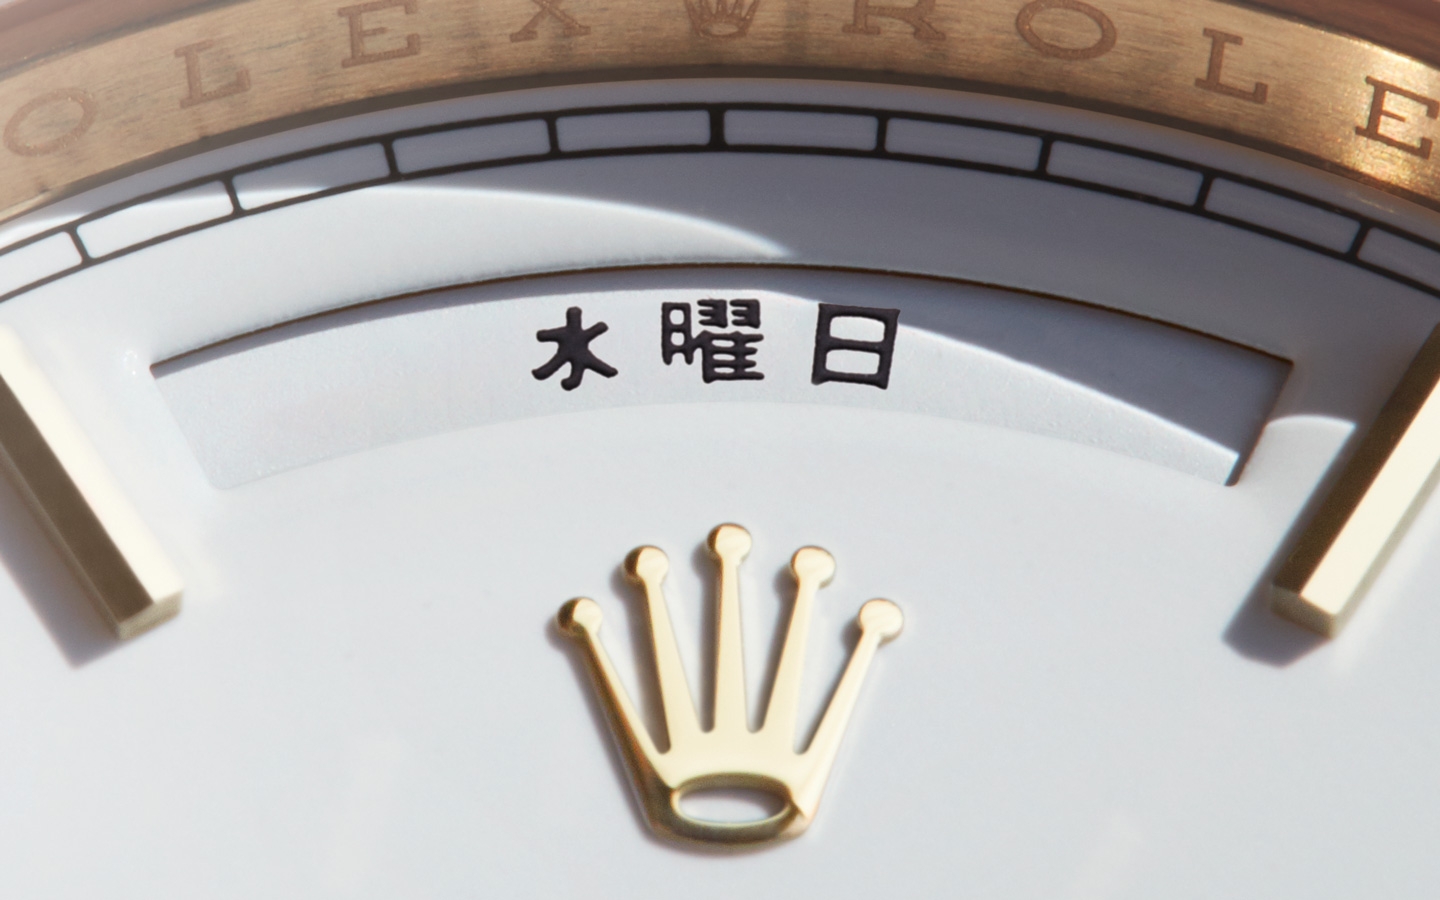 Chinese letters on a watch